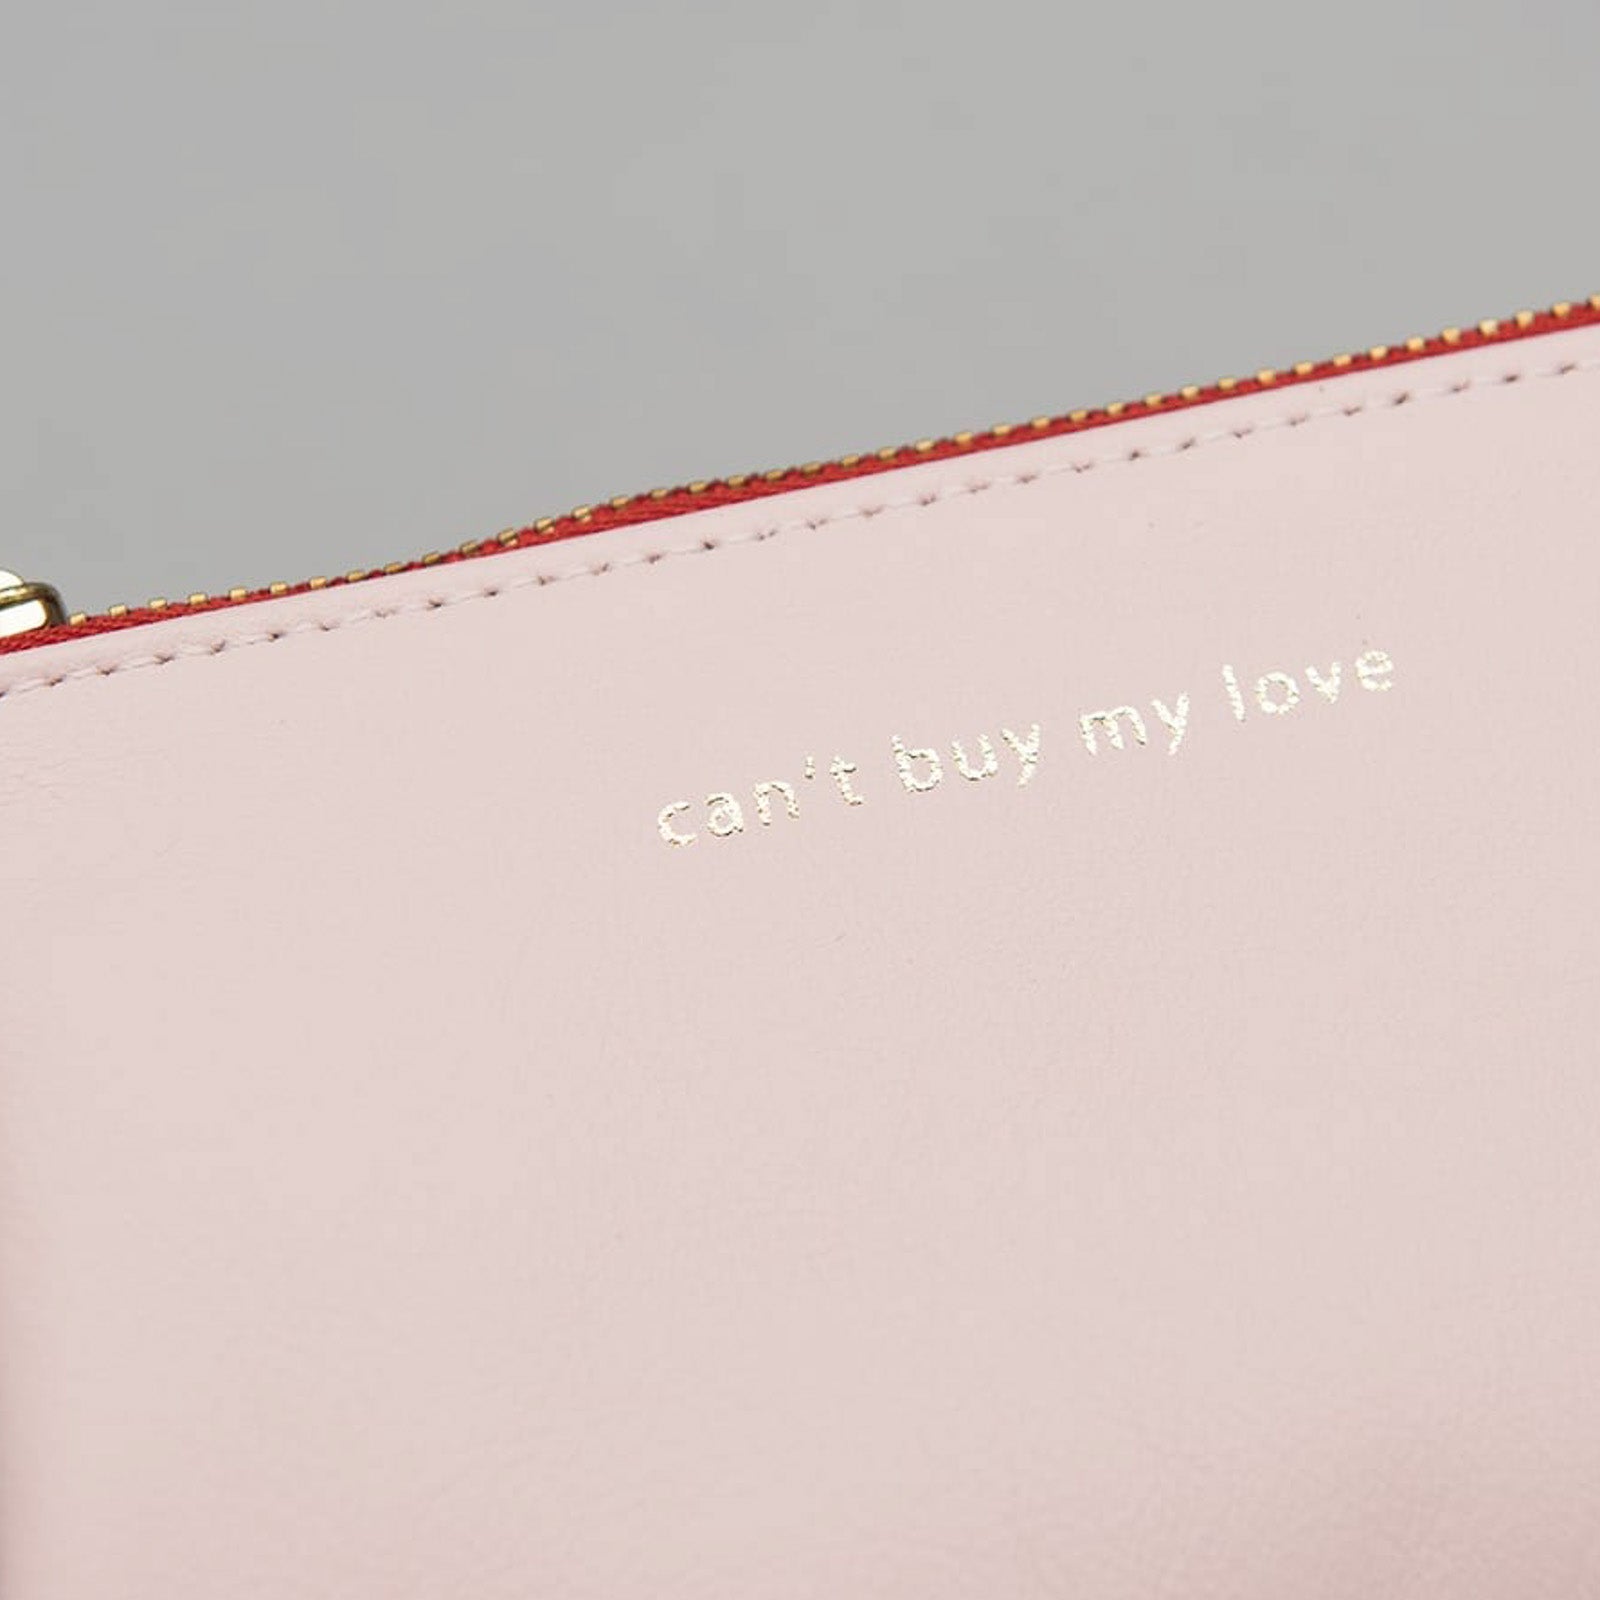 Pouch XS "Can't buy My Love"